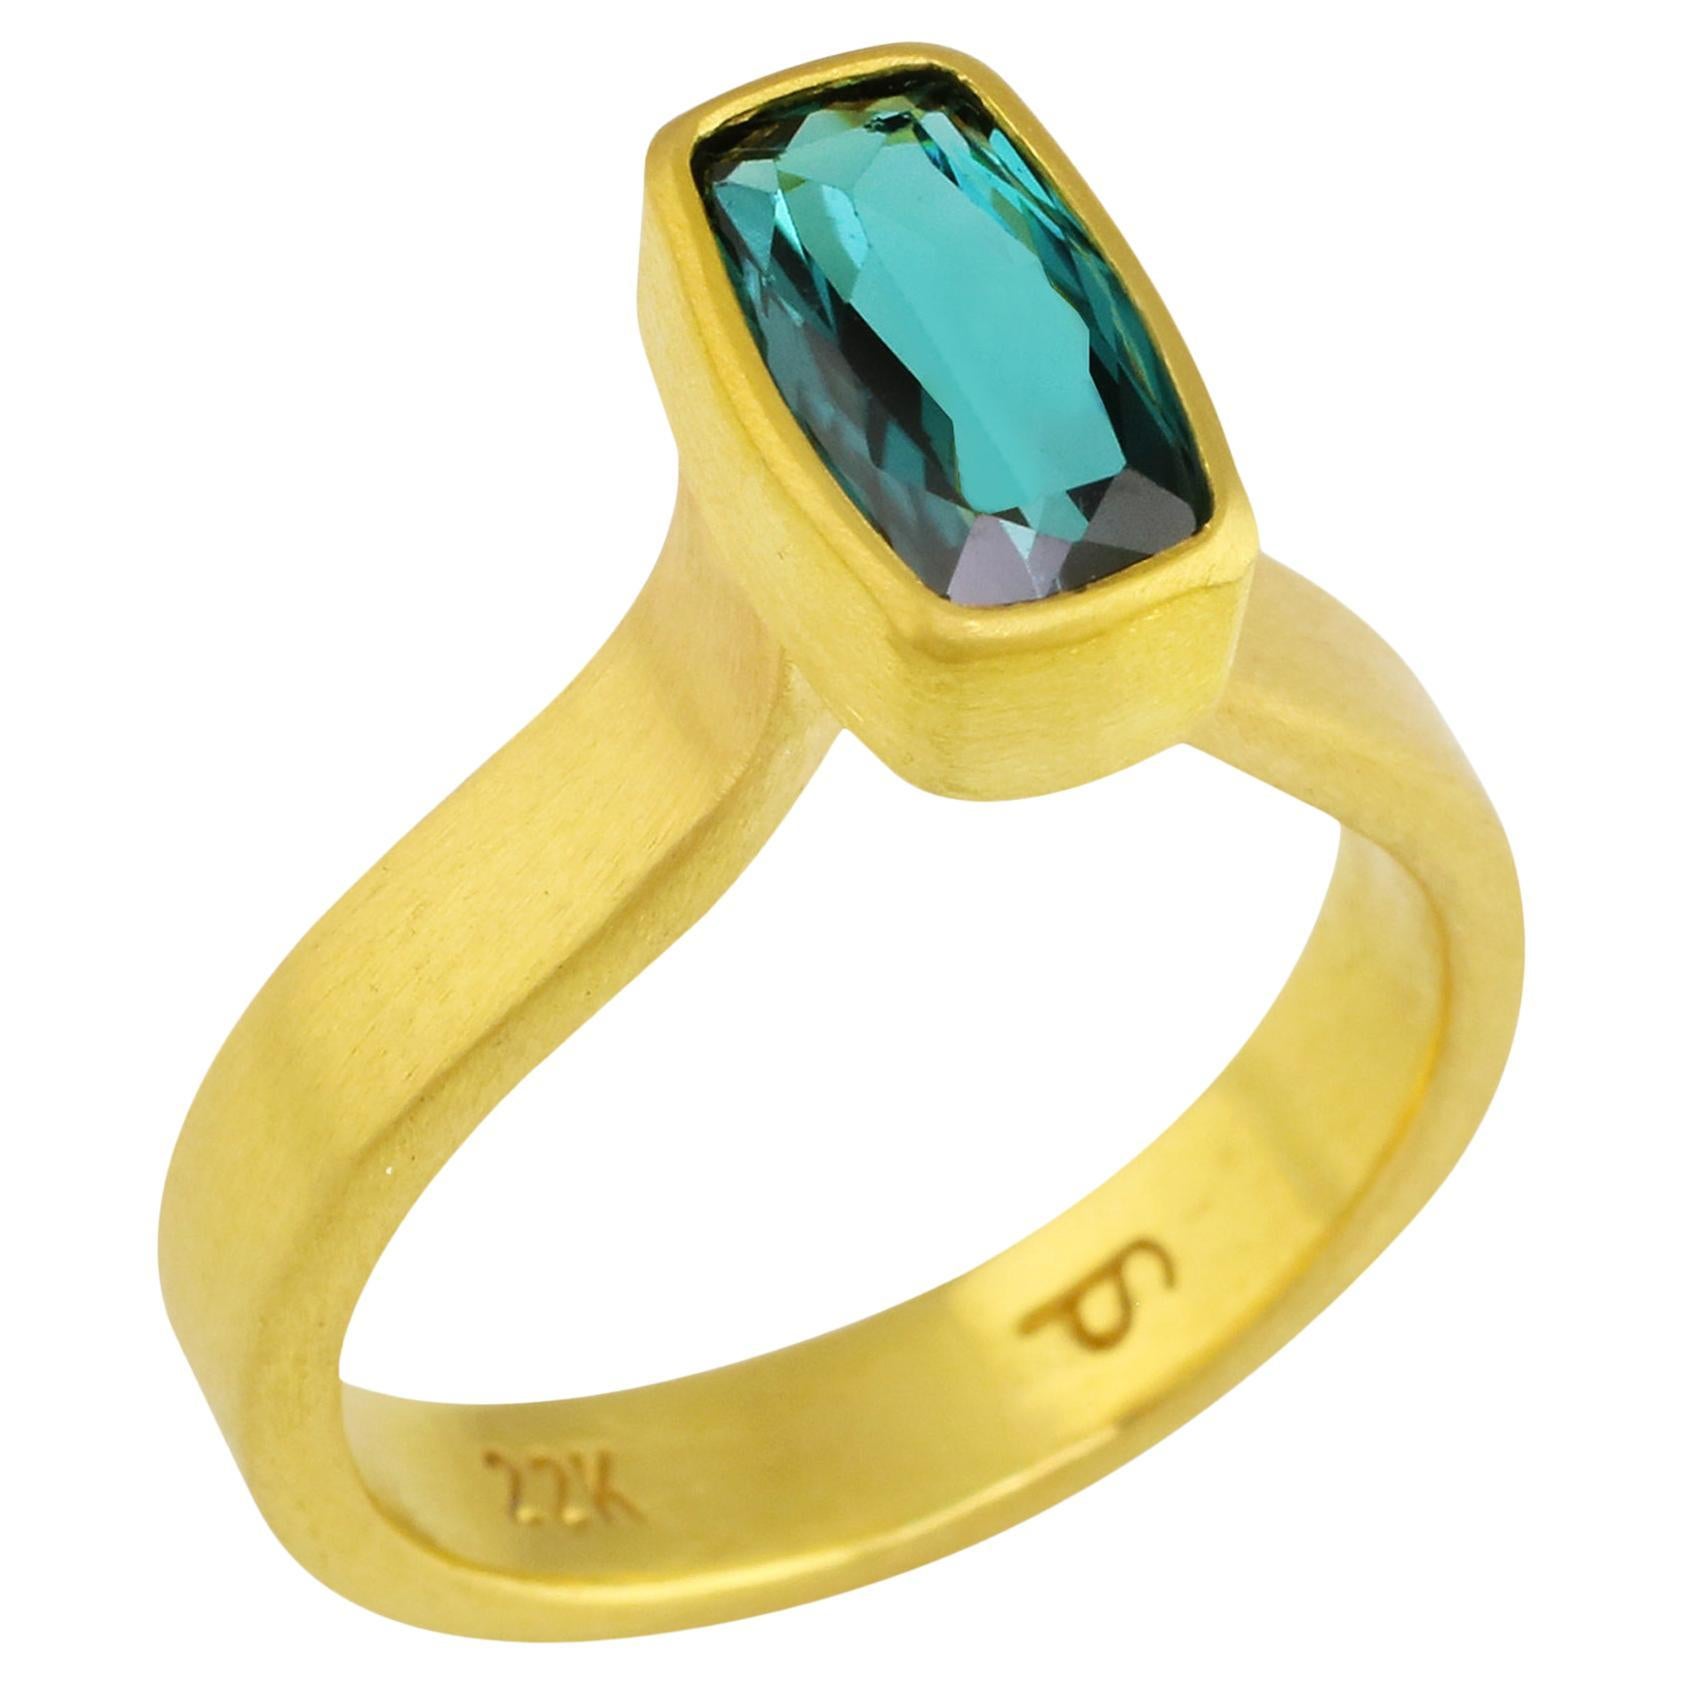 PHILIPPE SPENCER 1.6 Ct. Teal Tourmaline Statement Ring in 22K Gold For Sale